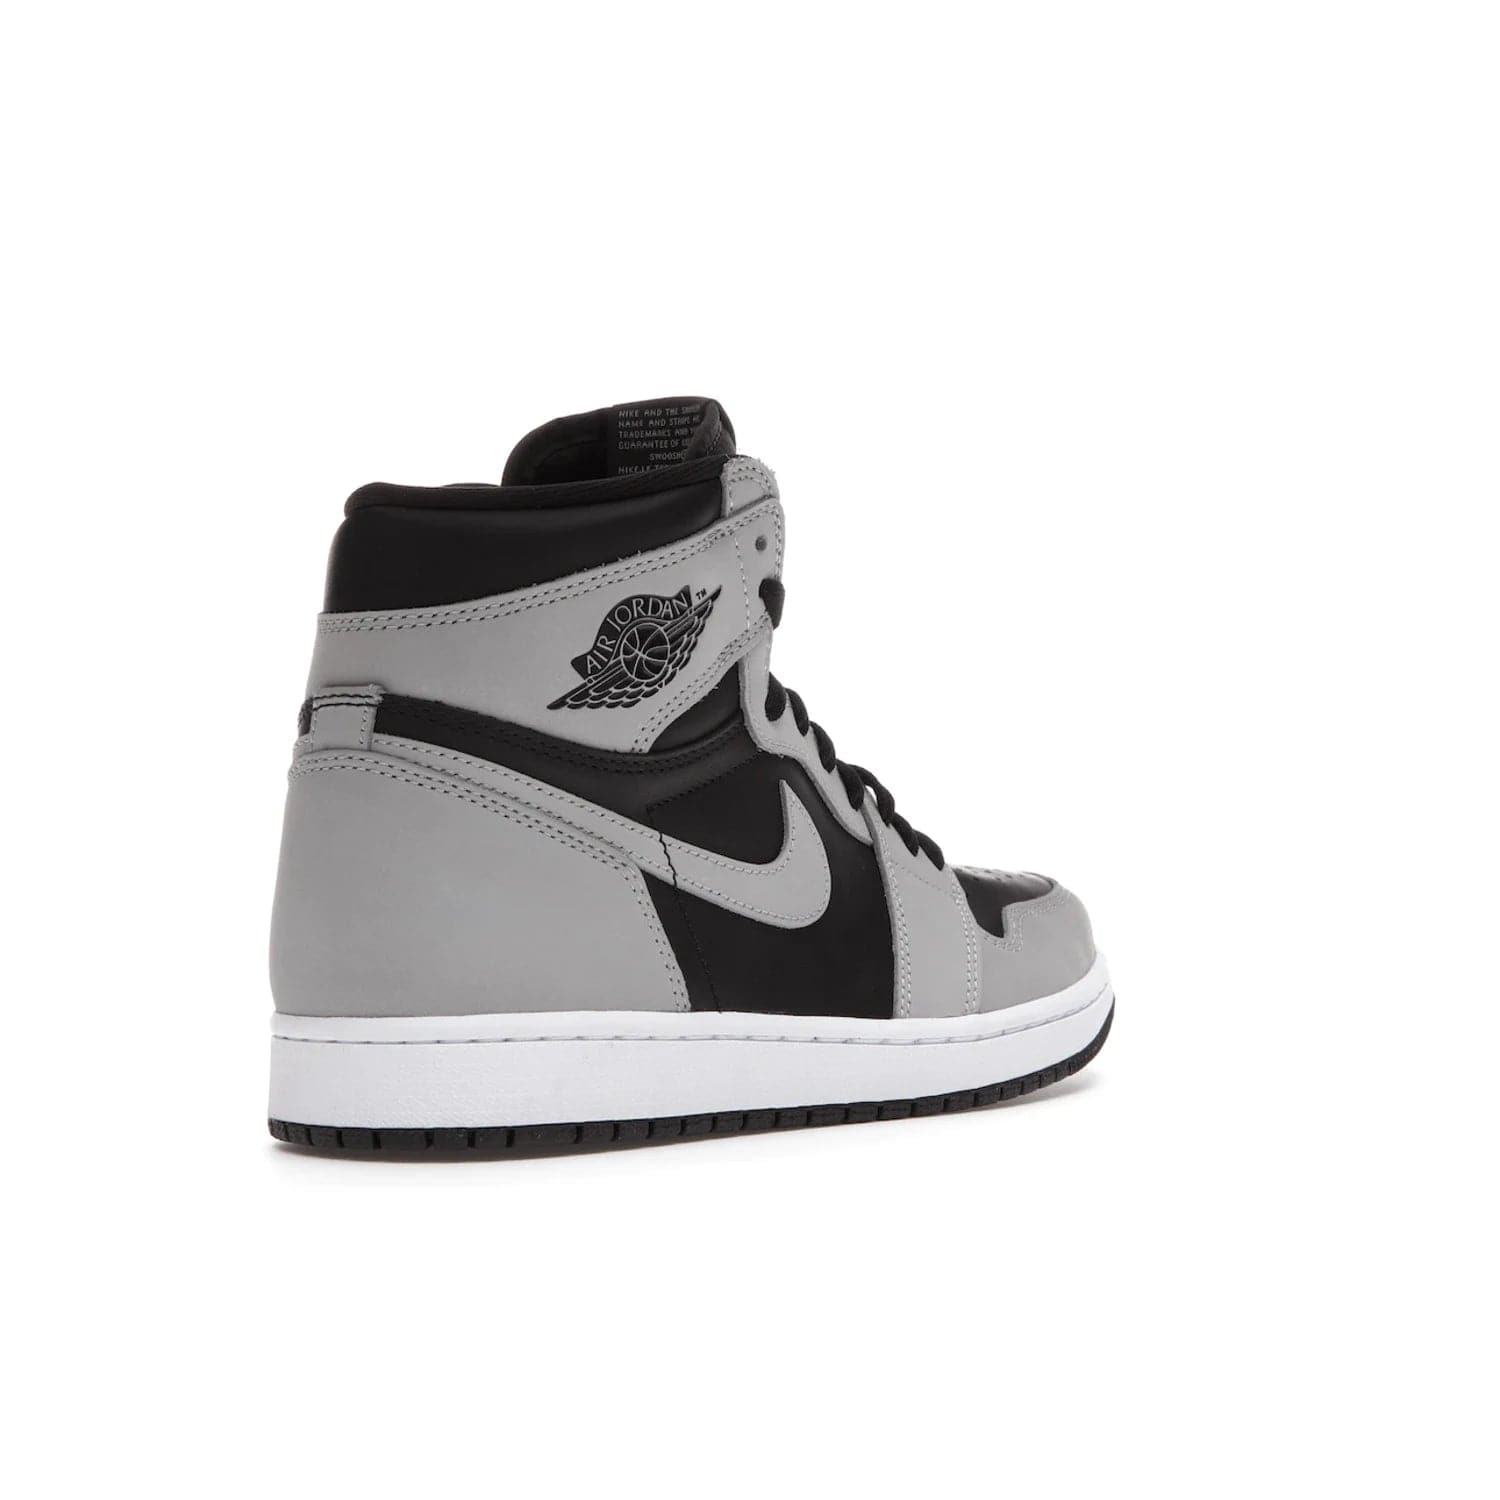 Jordan 1 Retro High Shadow 2.0 - Image 32 - Only at www.BallersClubKickz.com - #
Classic Air Jordan 1 Retro High Shadow 2.0 with black leather base and Light Smoke Grey overlays. Released in May 2021.